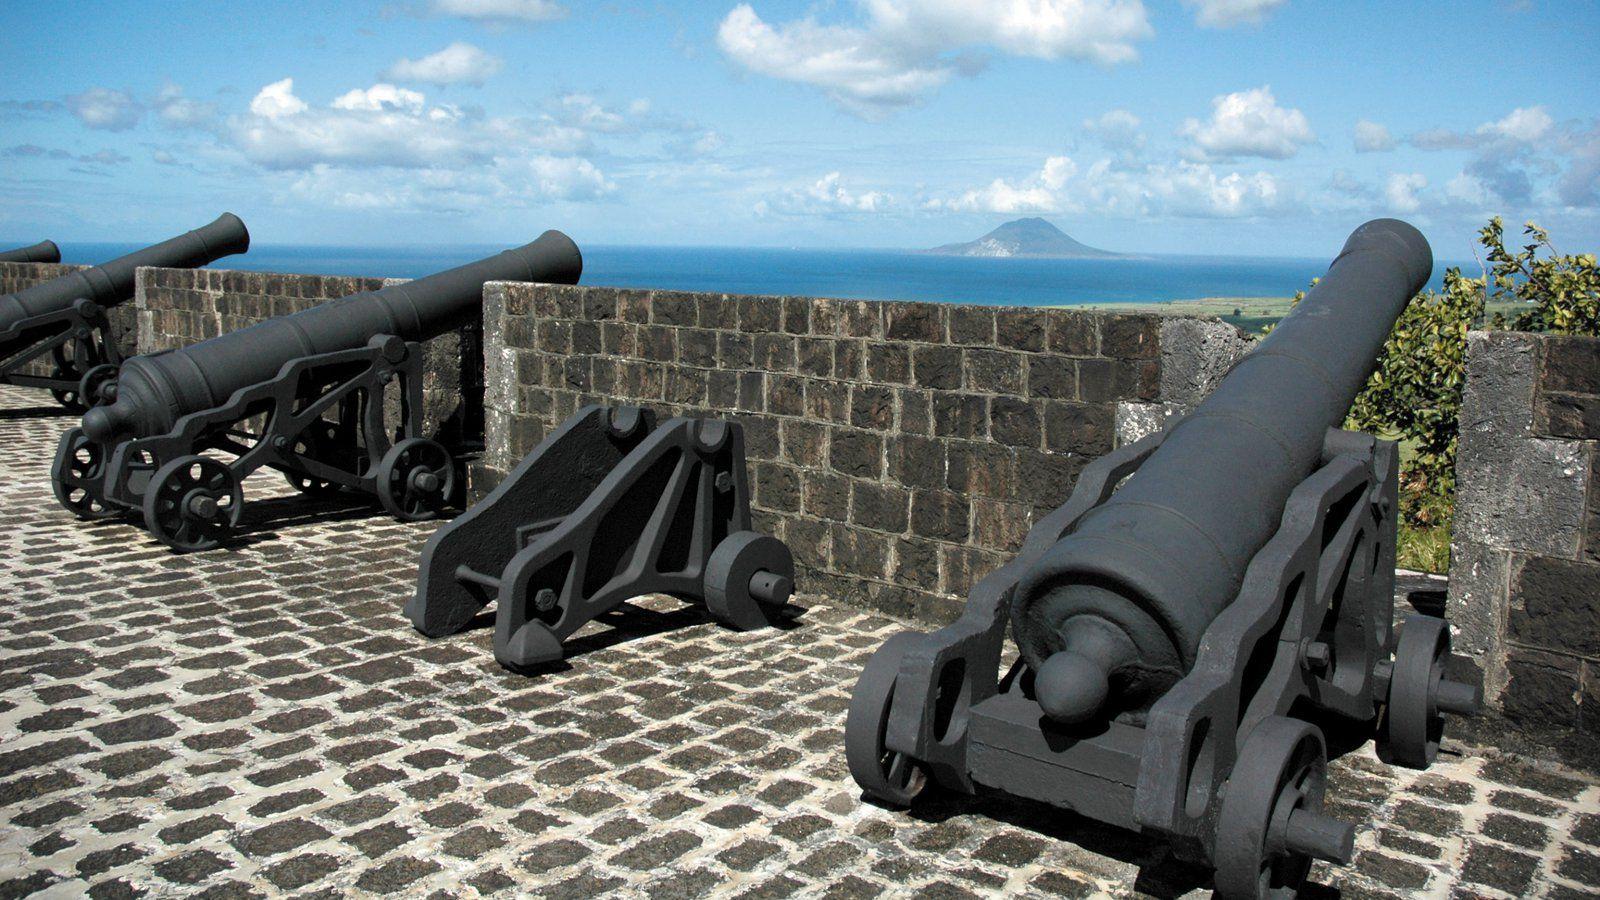 Military Pictures: View Image of St. Kitts and Nevis